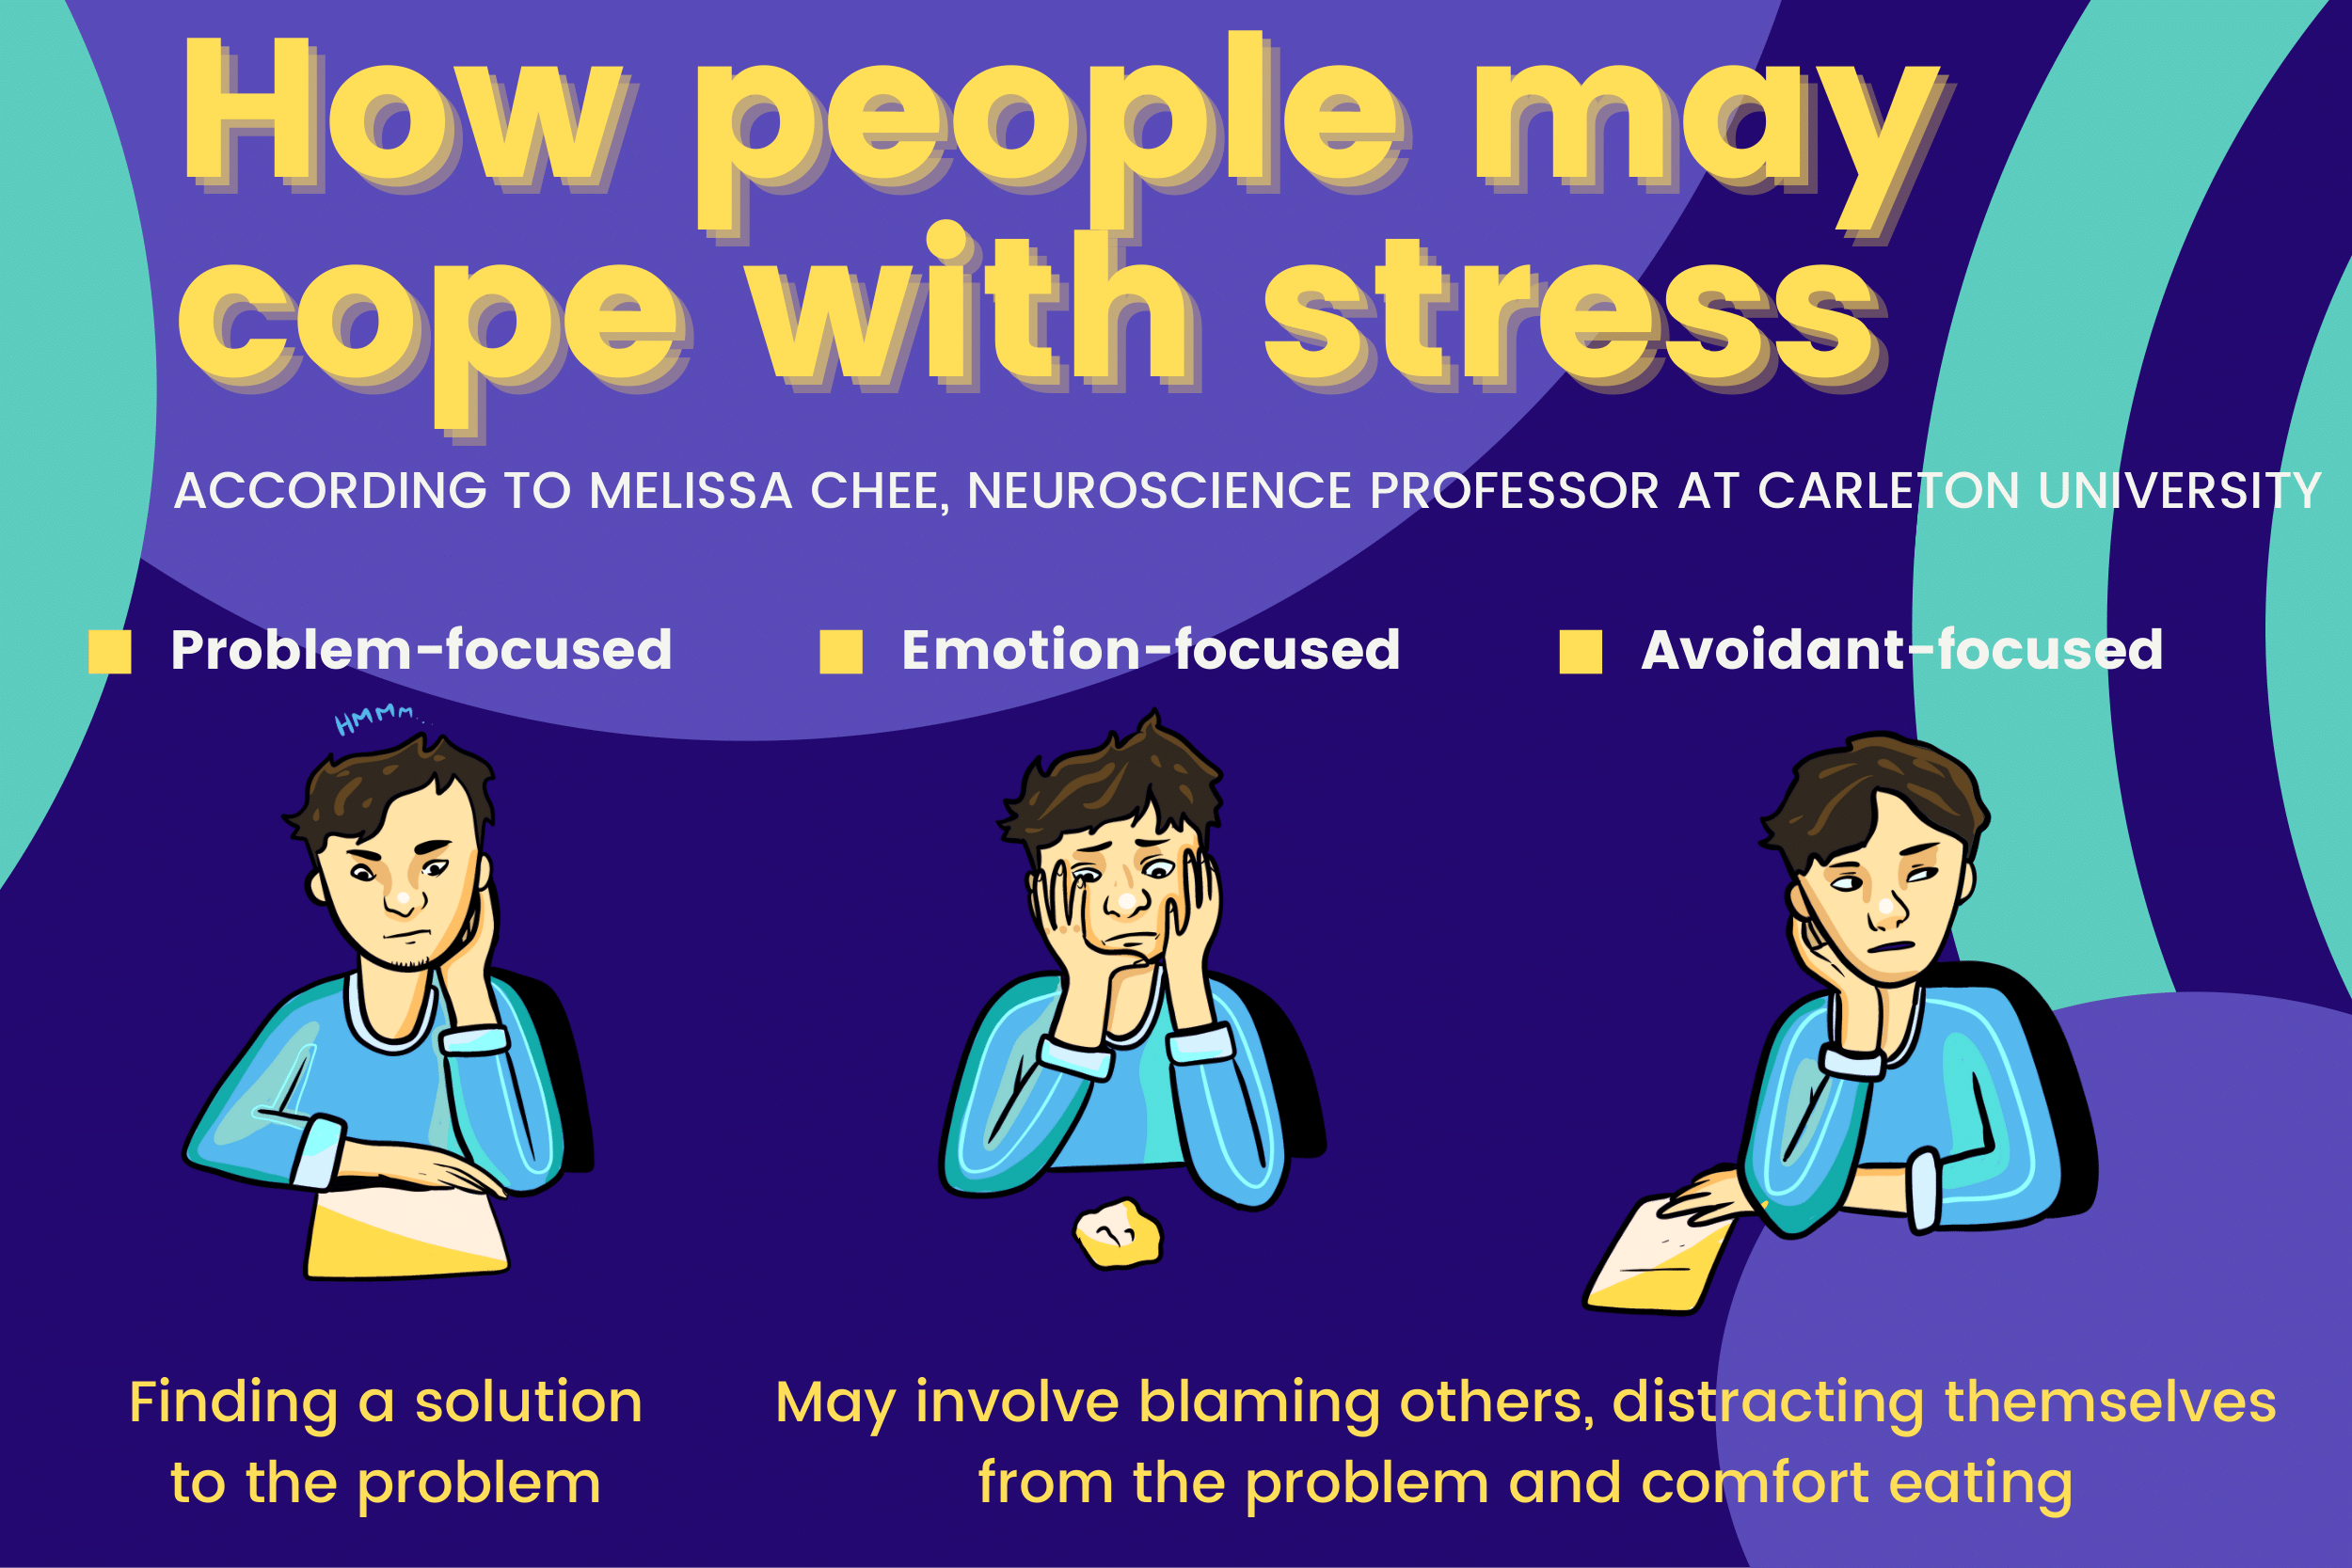 People may cope with stress in different ways, according to Dr. Melissa Chee. [Graphic by Sara Mizannojehdehi]